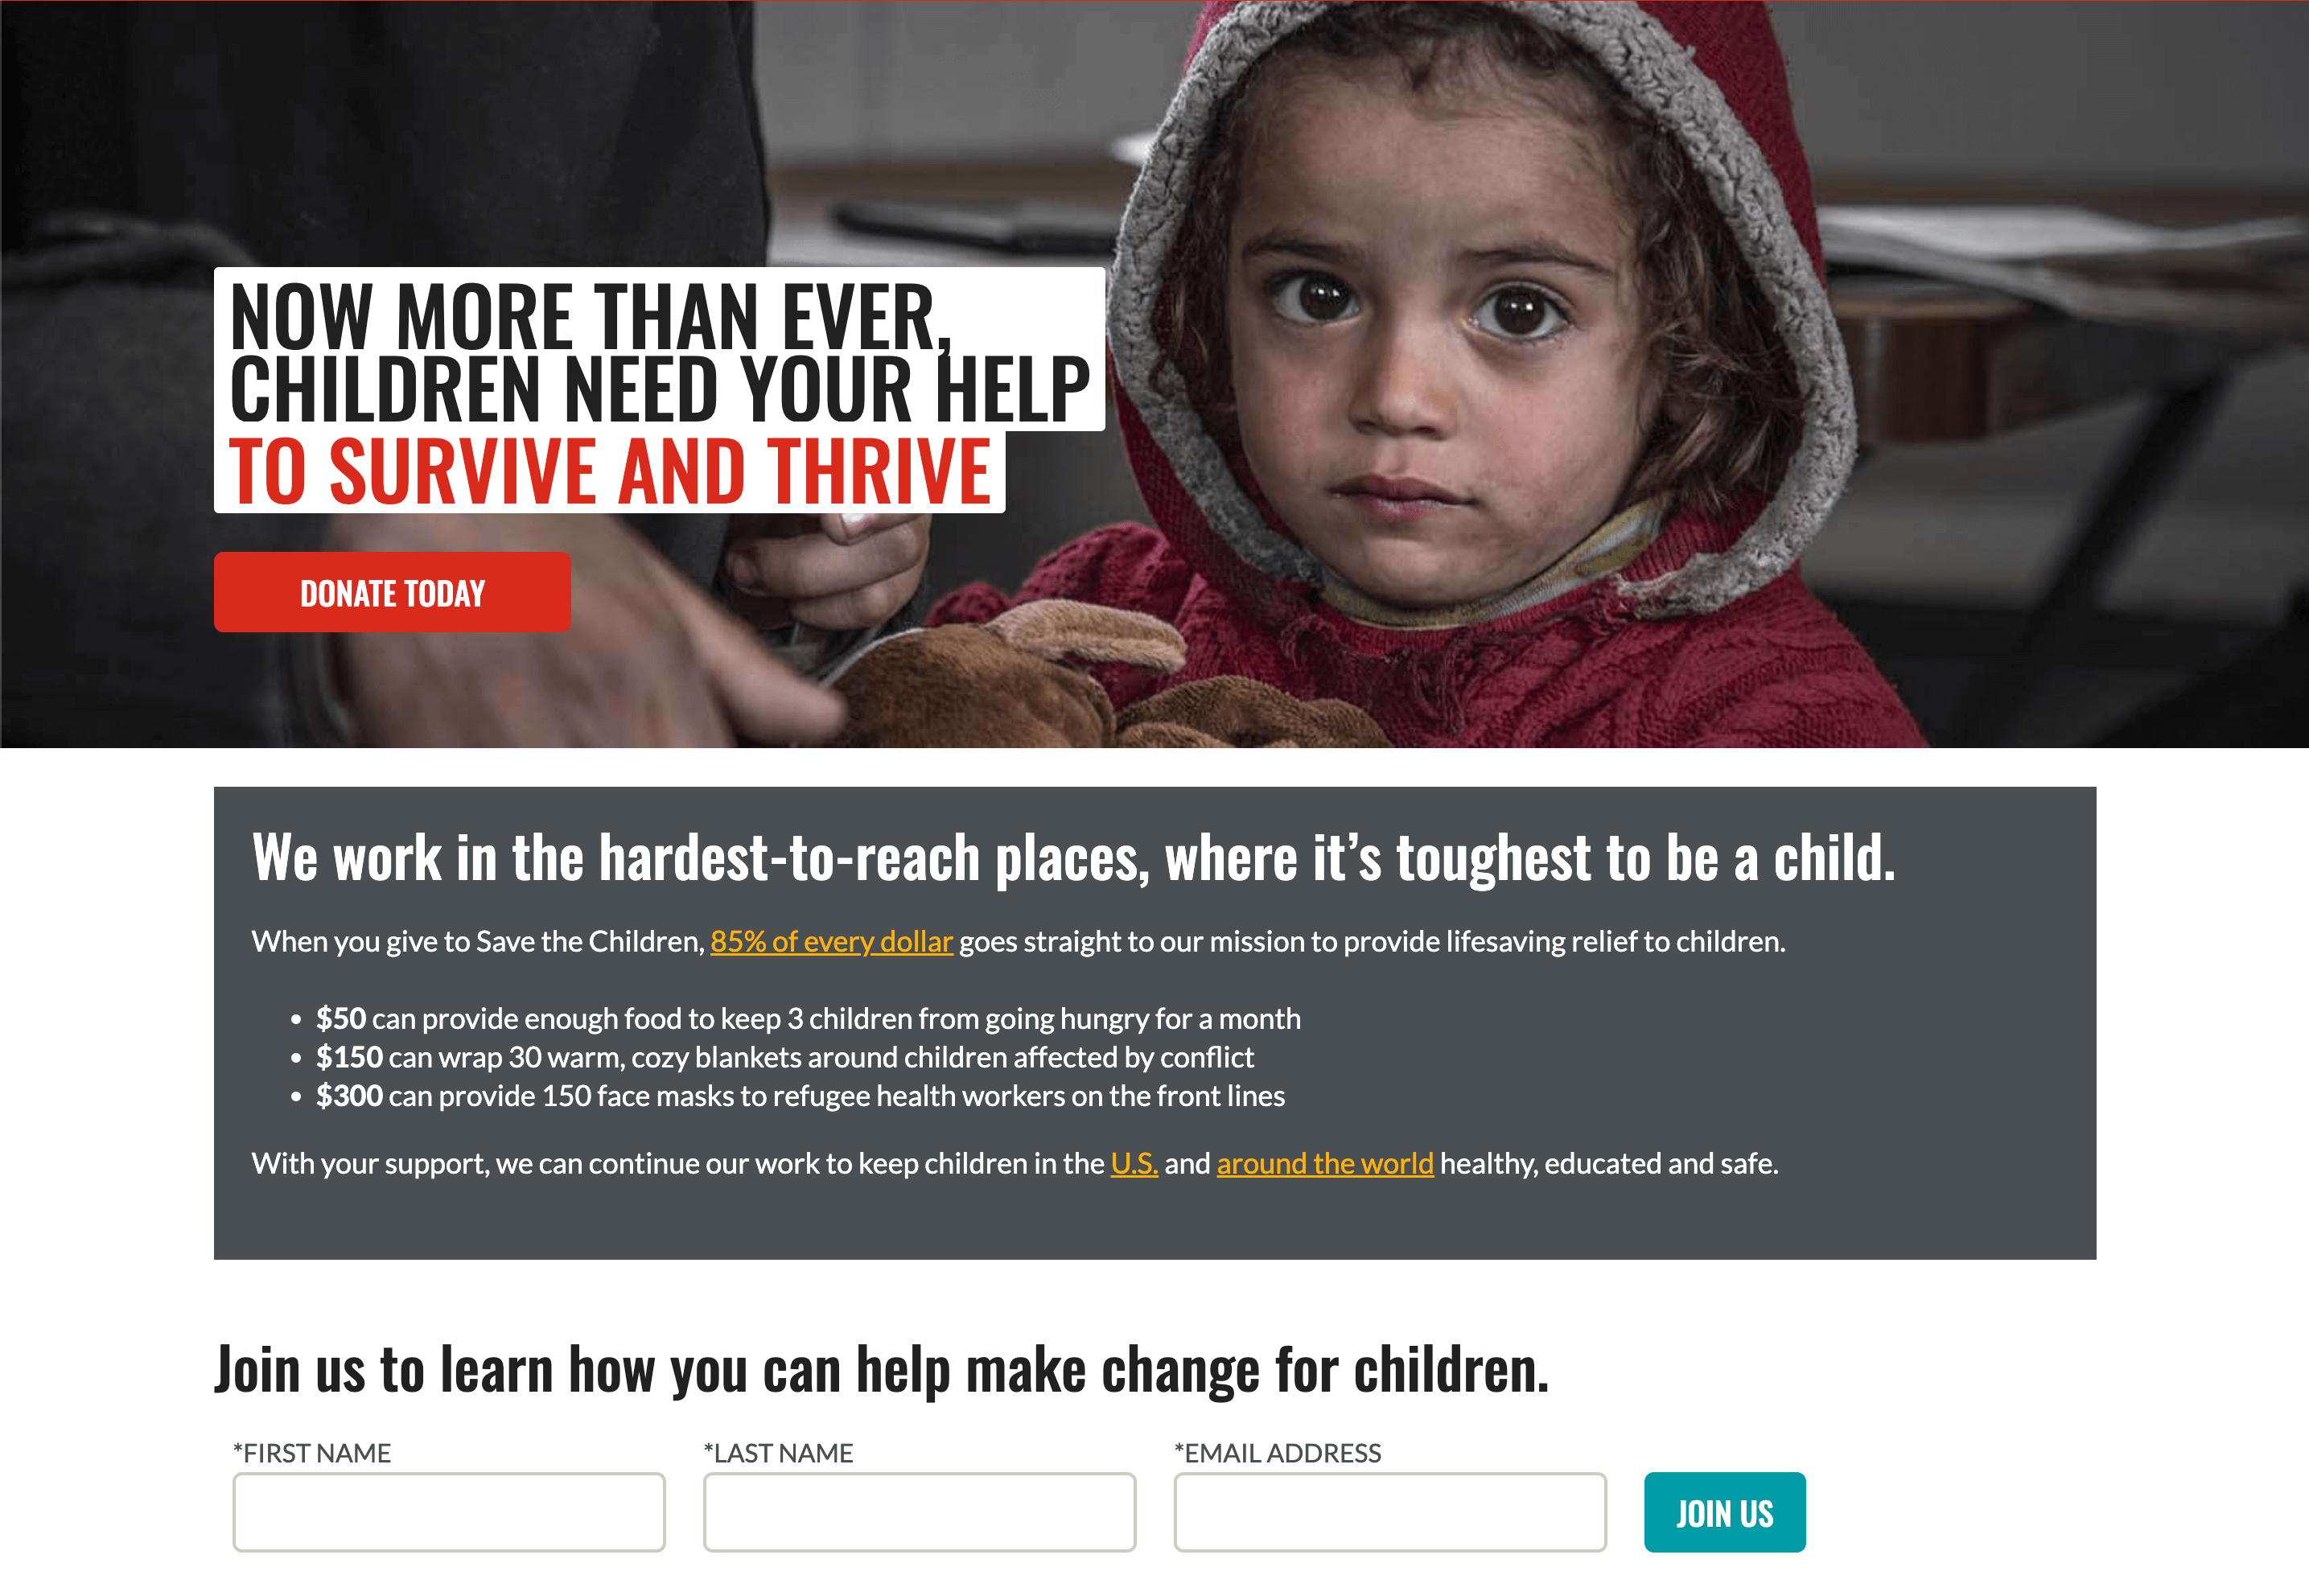 Save the Children's home page